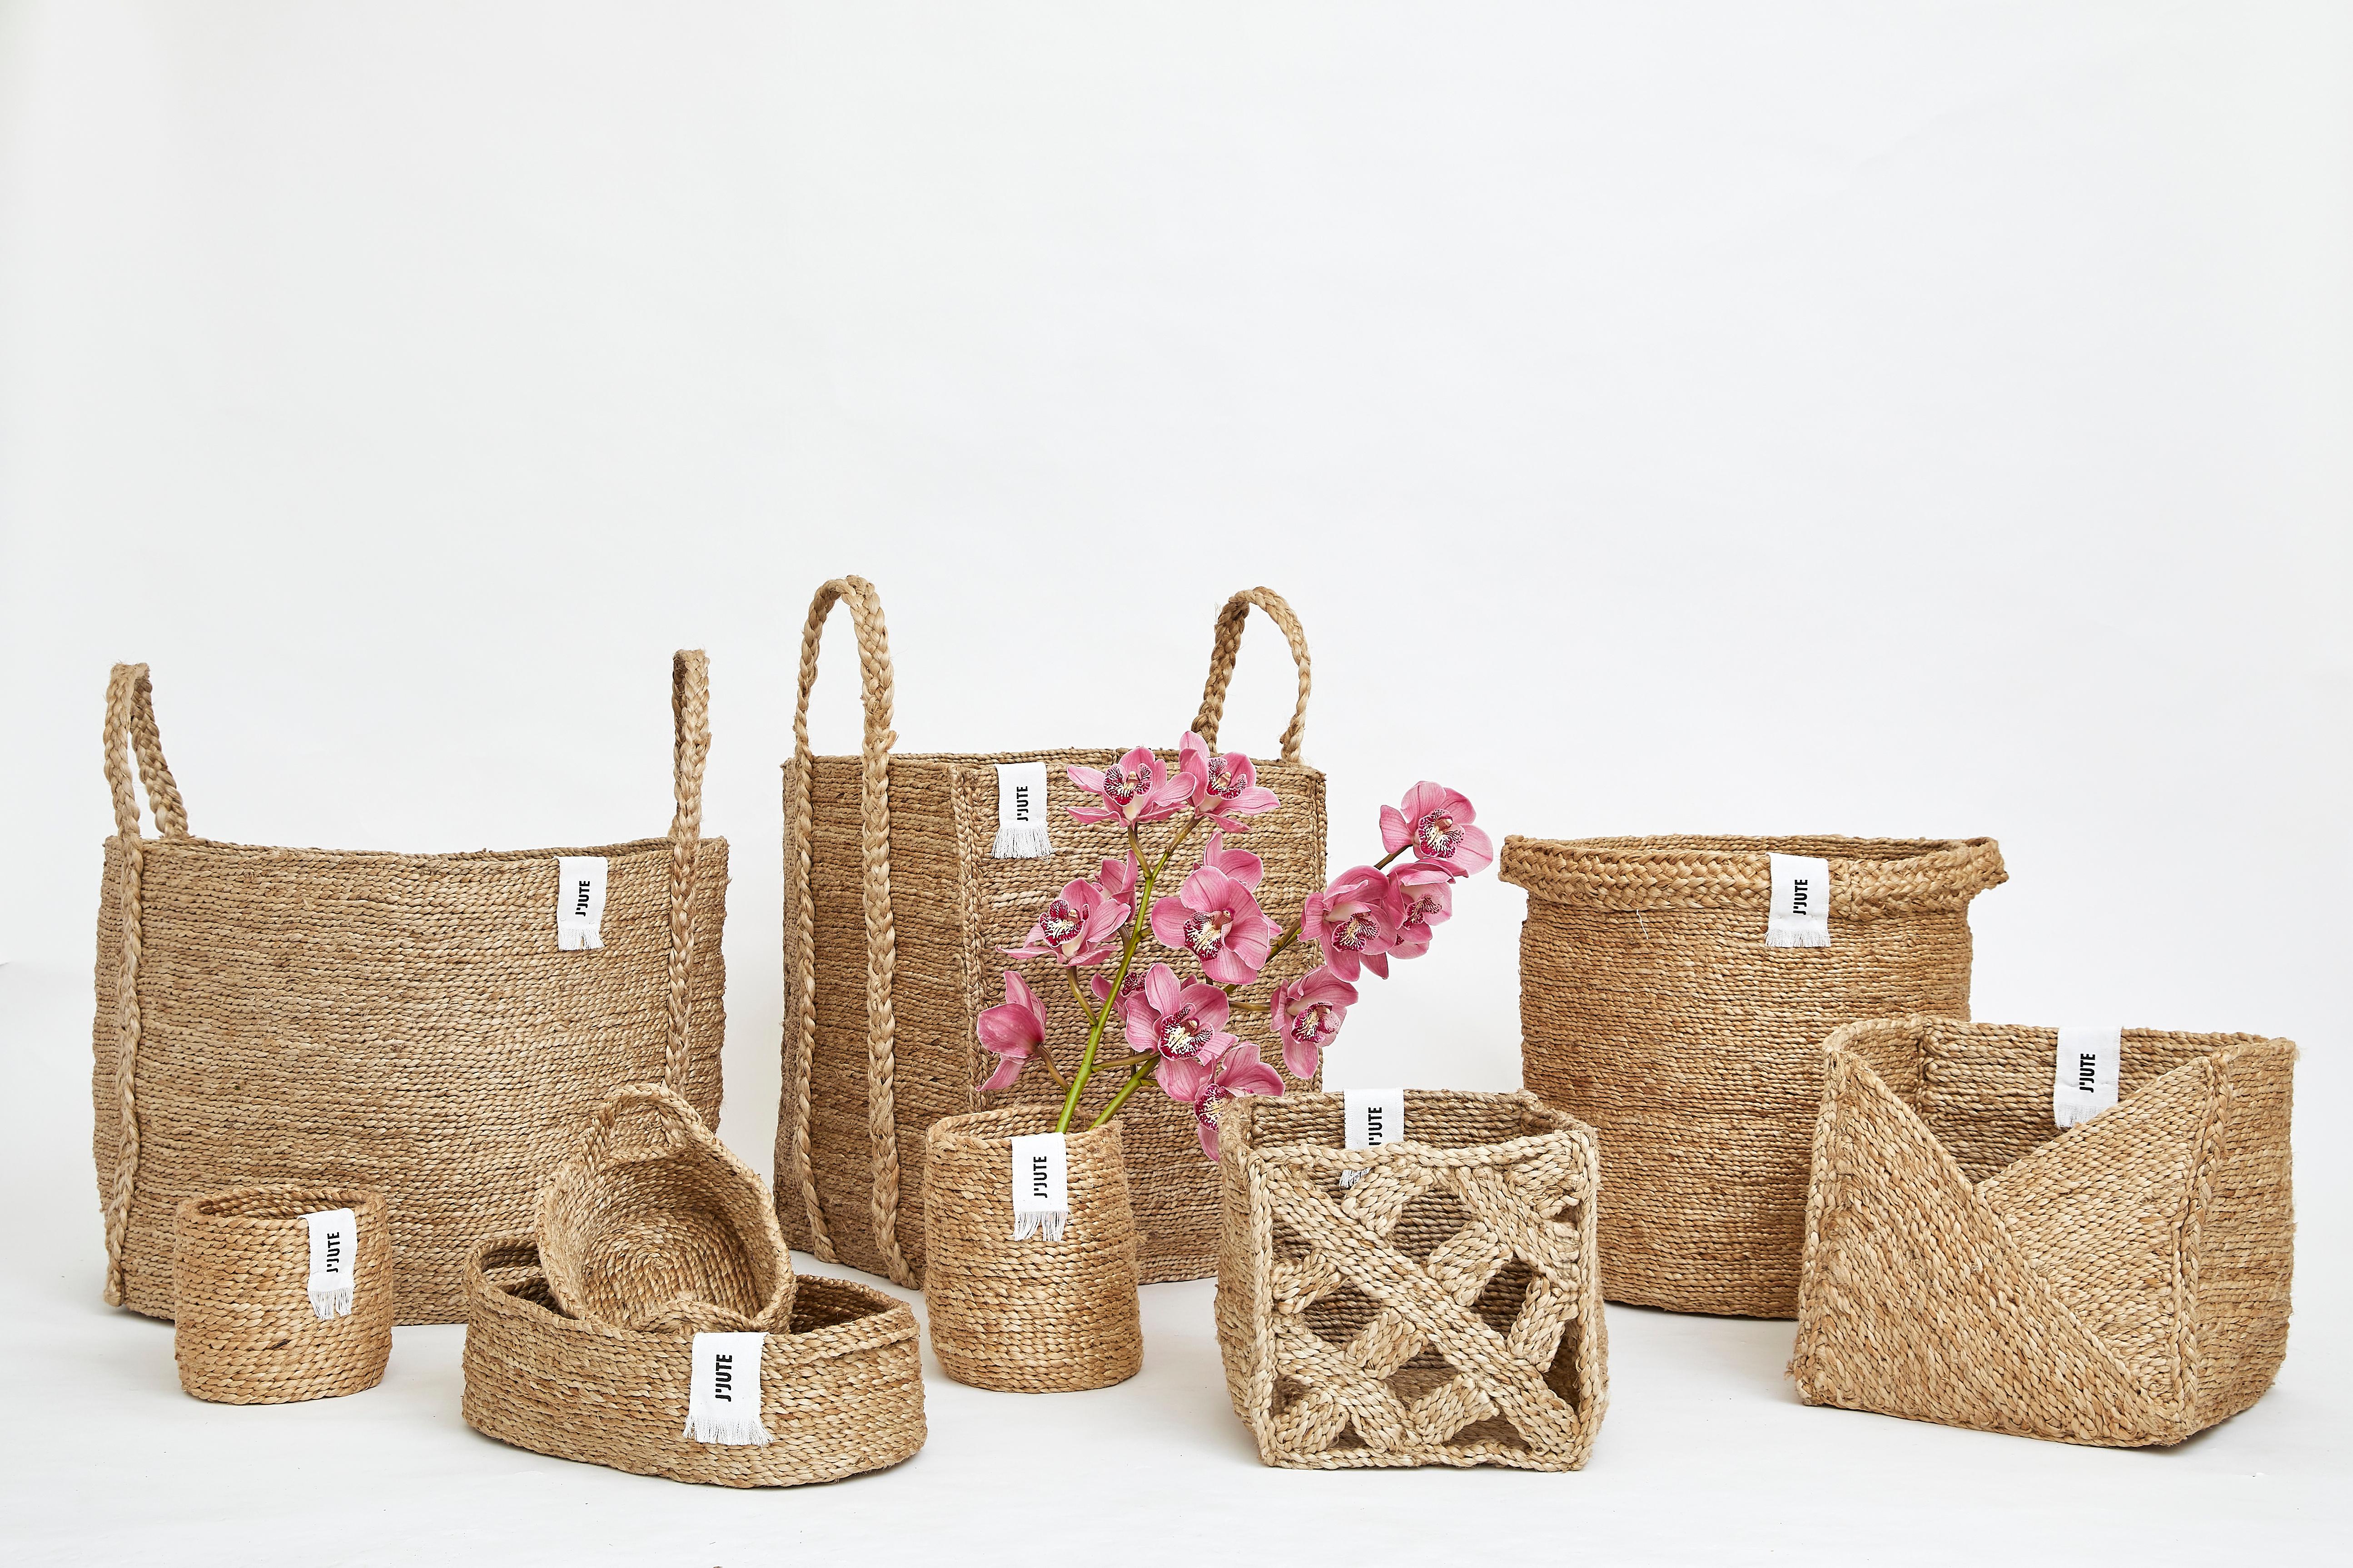 J'Jute Camp Cove Jute Tray Baskets, Natural- stacking set of 2

J'Jute is an Australian Luxury Home Brand that offers uncompromising quality handmade objects for the home. Each J'Jute style is designed by Taylor and Nicholas Barber in Bondi Beach,